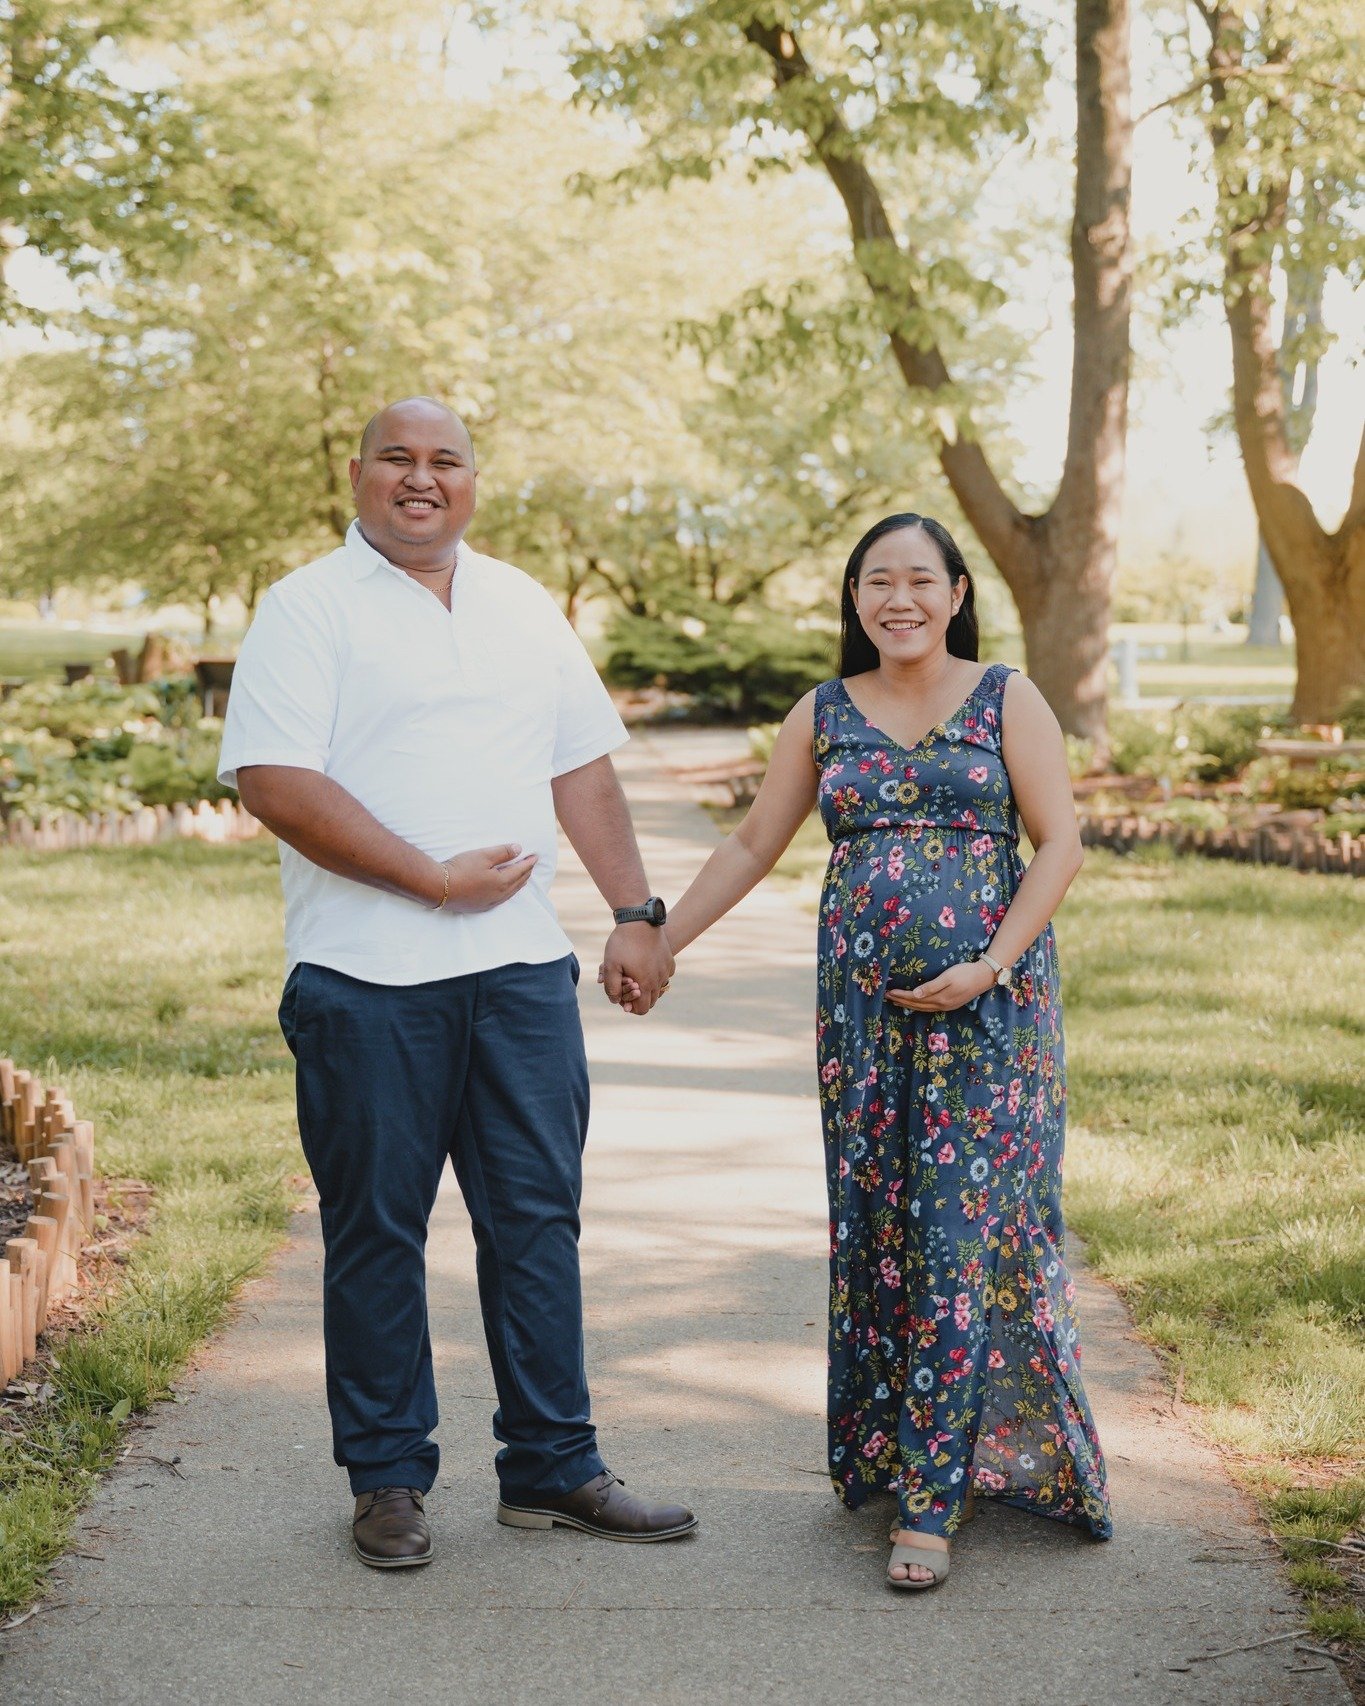 Congratulations to Peachy and Arvin! 

Their little one is almost here, and everyone is super excited for you guys. You two are going to be such great parents to your little girl!